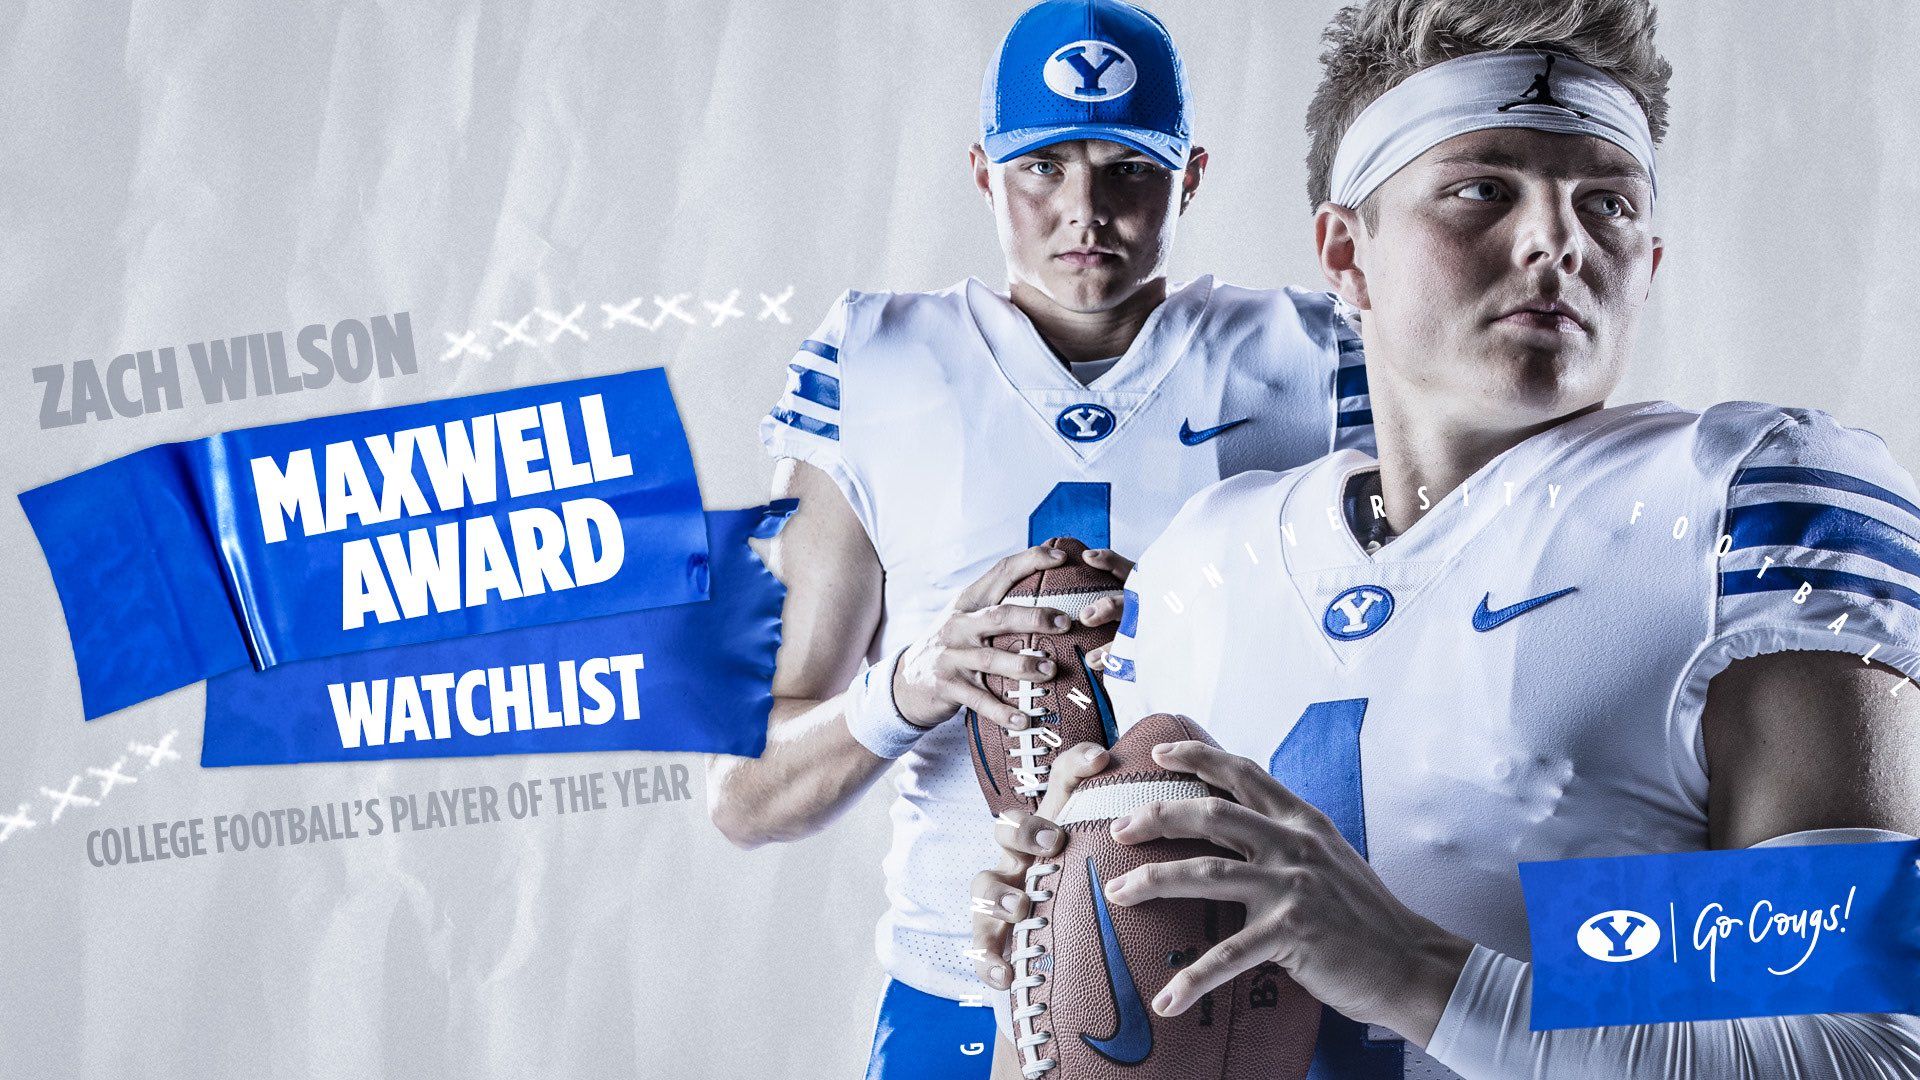 BYU FOOTBALL Wilson has been named to the 2020 watch list for the 84th Maxwell Award presented annually to the most outstanding player in college football. #BYUFOOTBALL #GoCougs